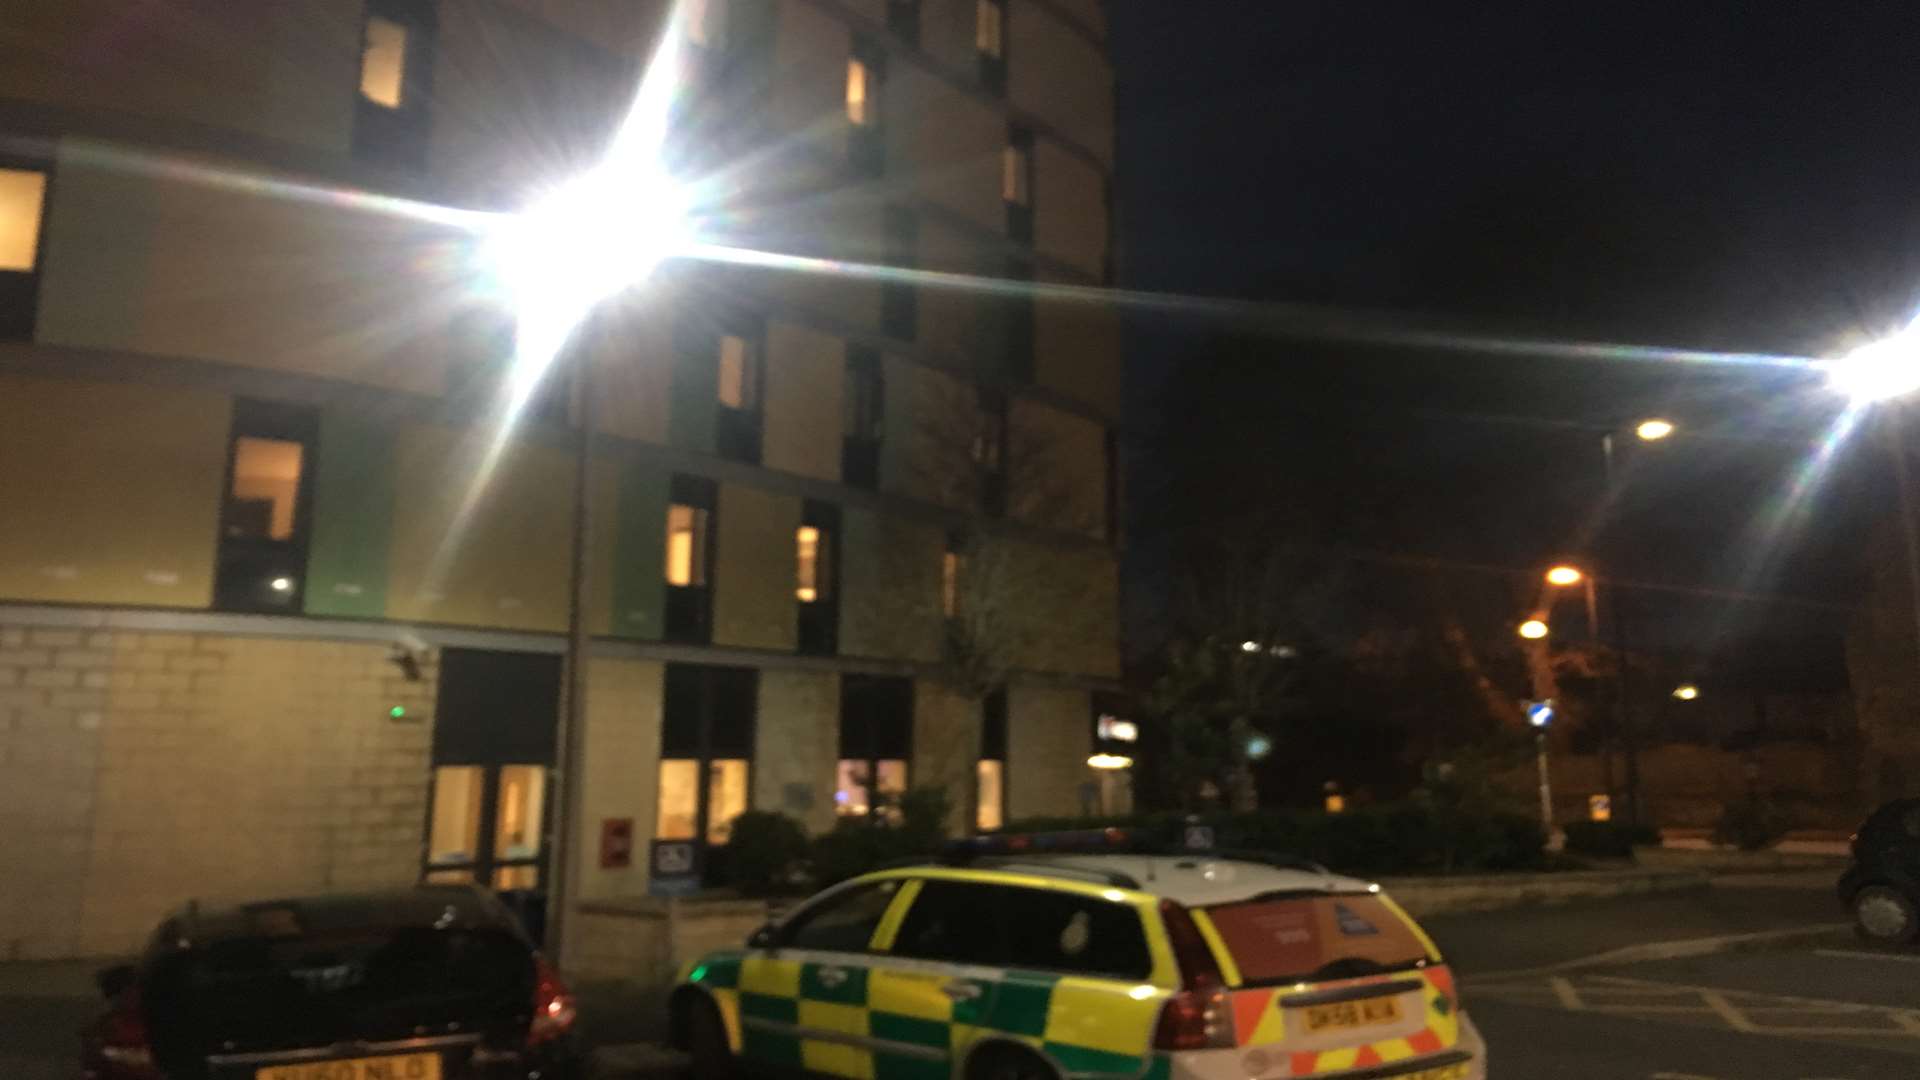 Police and paramedics were called to the hotel on Sunday night